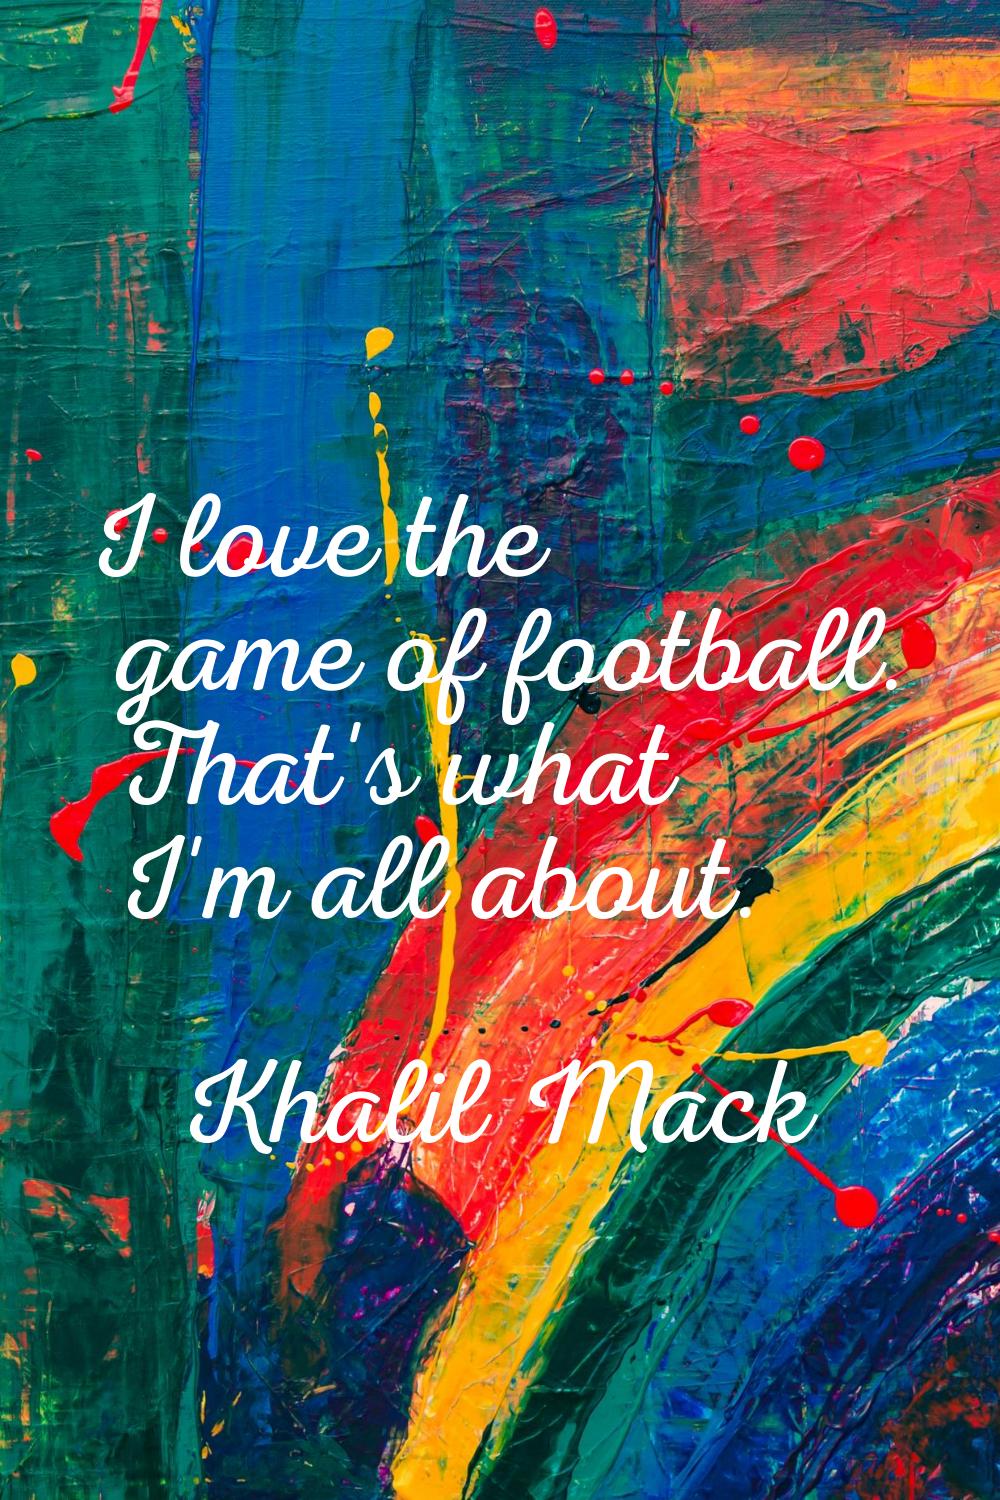 I love the game of football. That's what I'm all about.